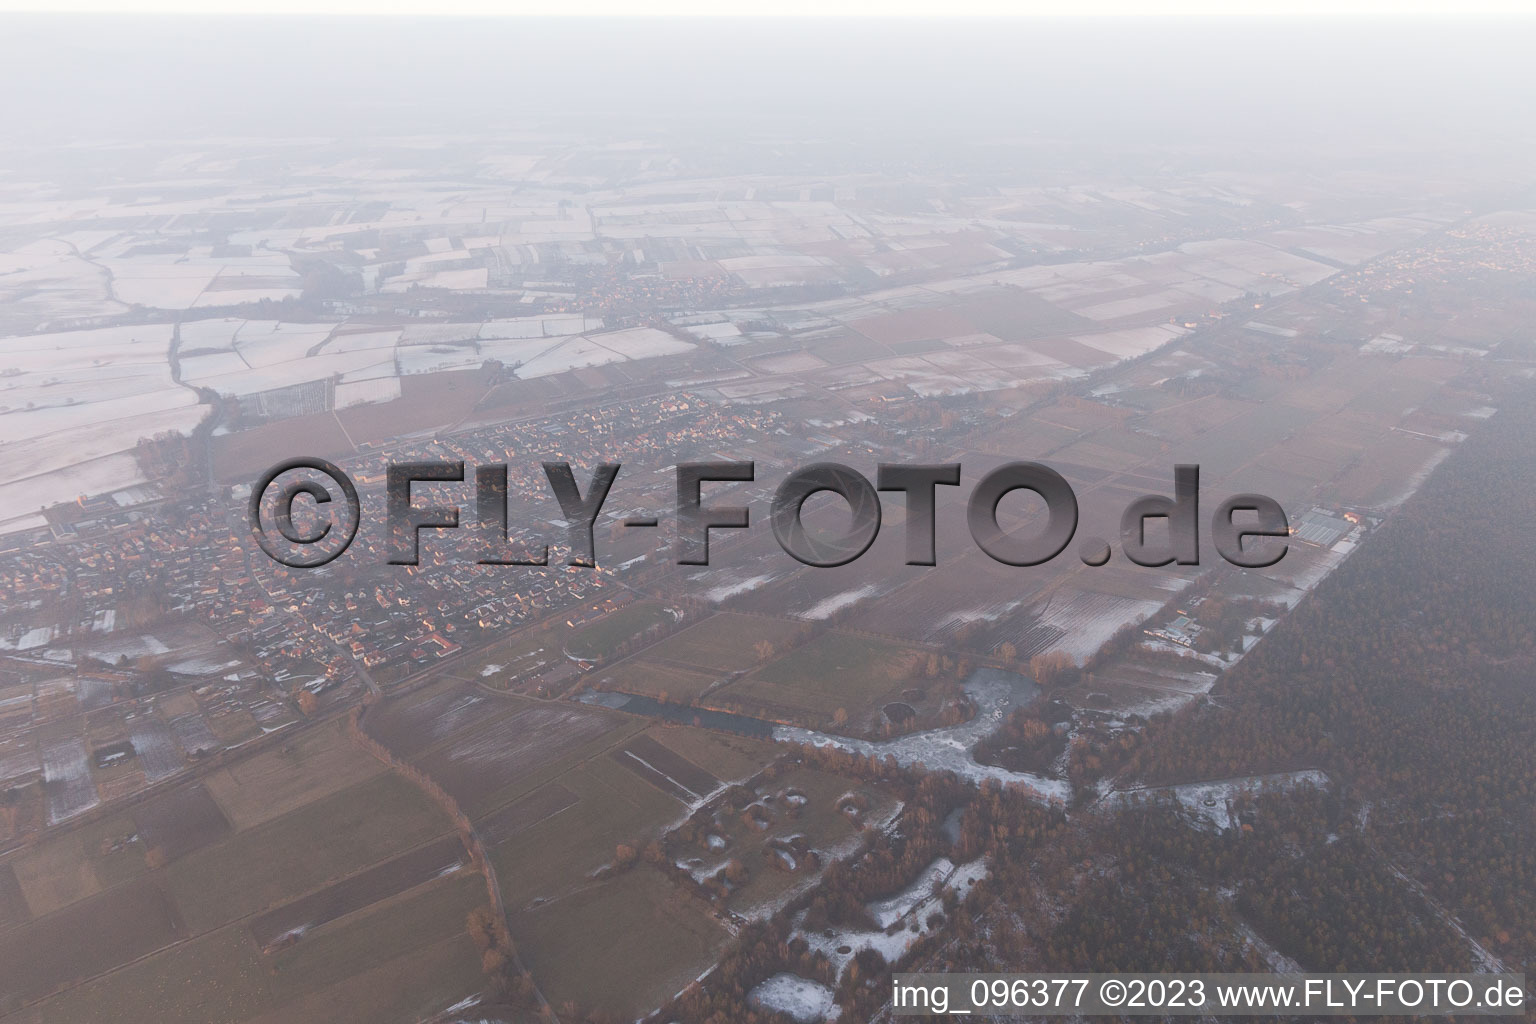 Steinfeld in the state Rhineland-Palatinate, Germany from the drone perspective